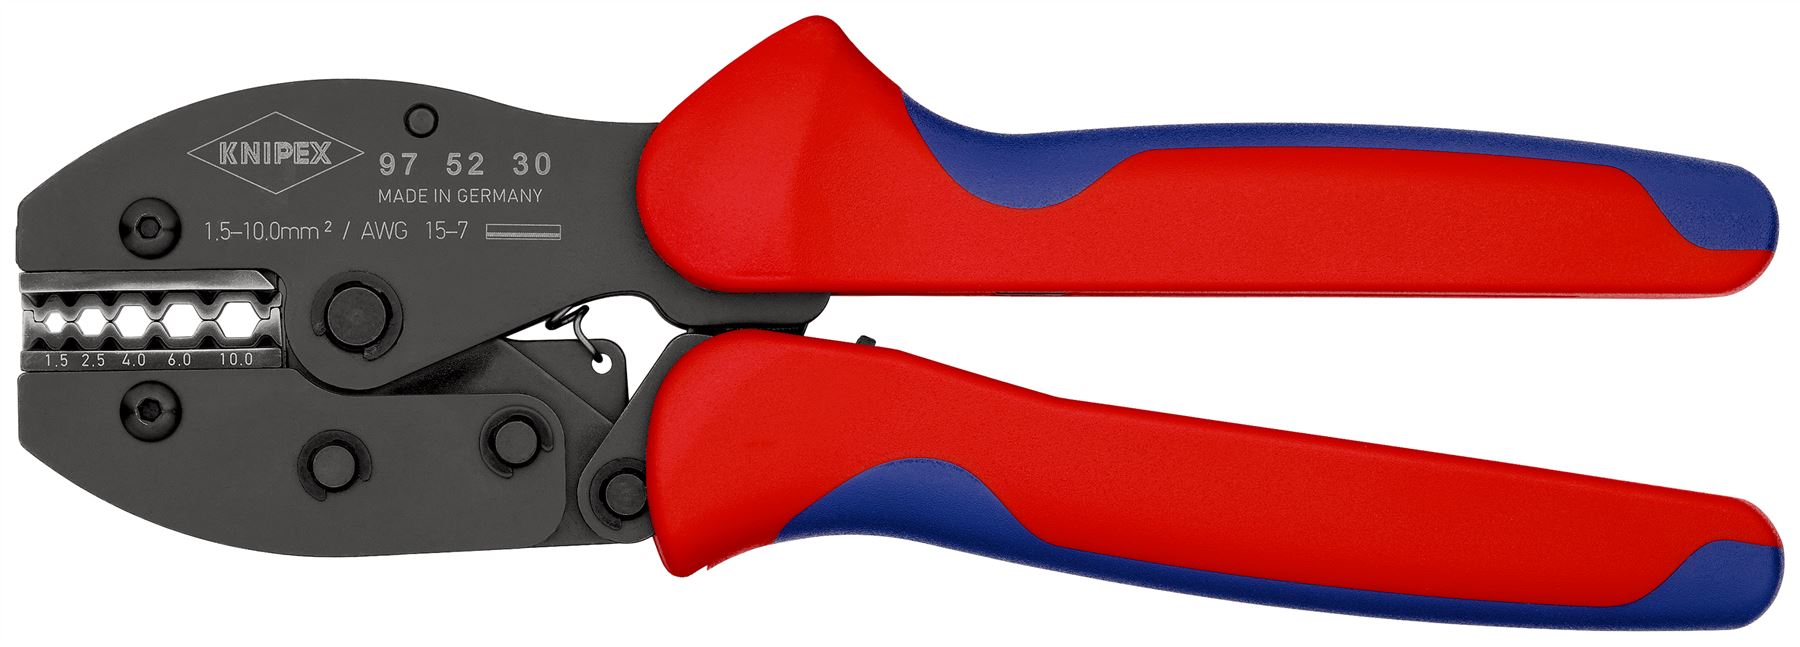 KNIPEX PreciForce Crimping Pliers for Non Insulated Terminals 1.5-10mm² 220mm 97 52 30